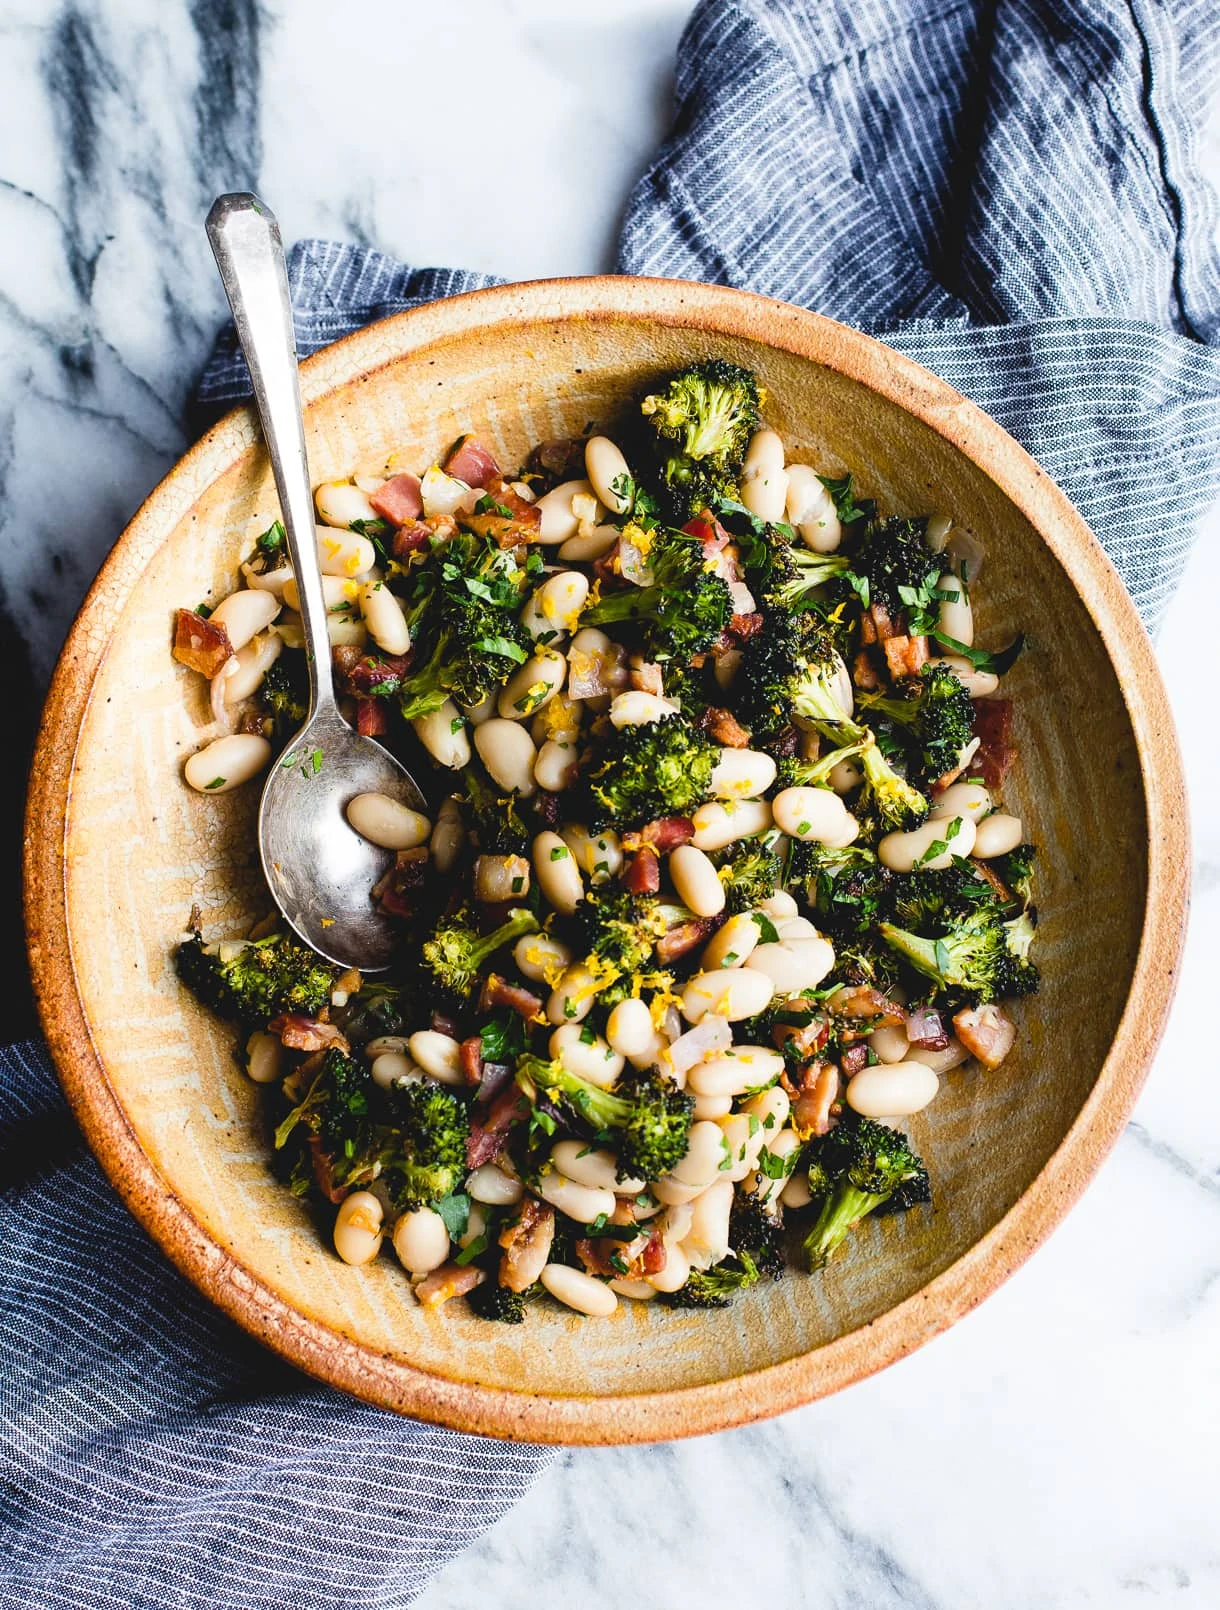 Lemon Roasted Broccoli with Bacon and Great Northern Beans Recipe